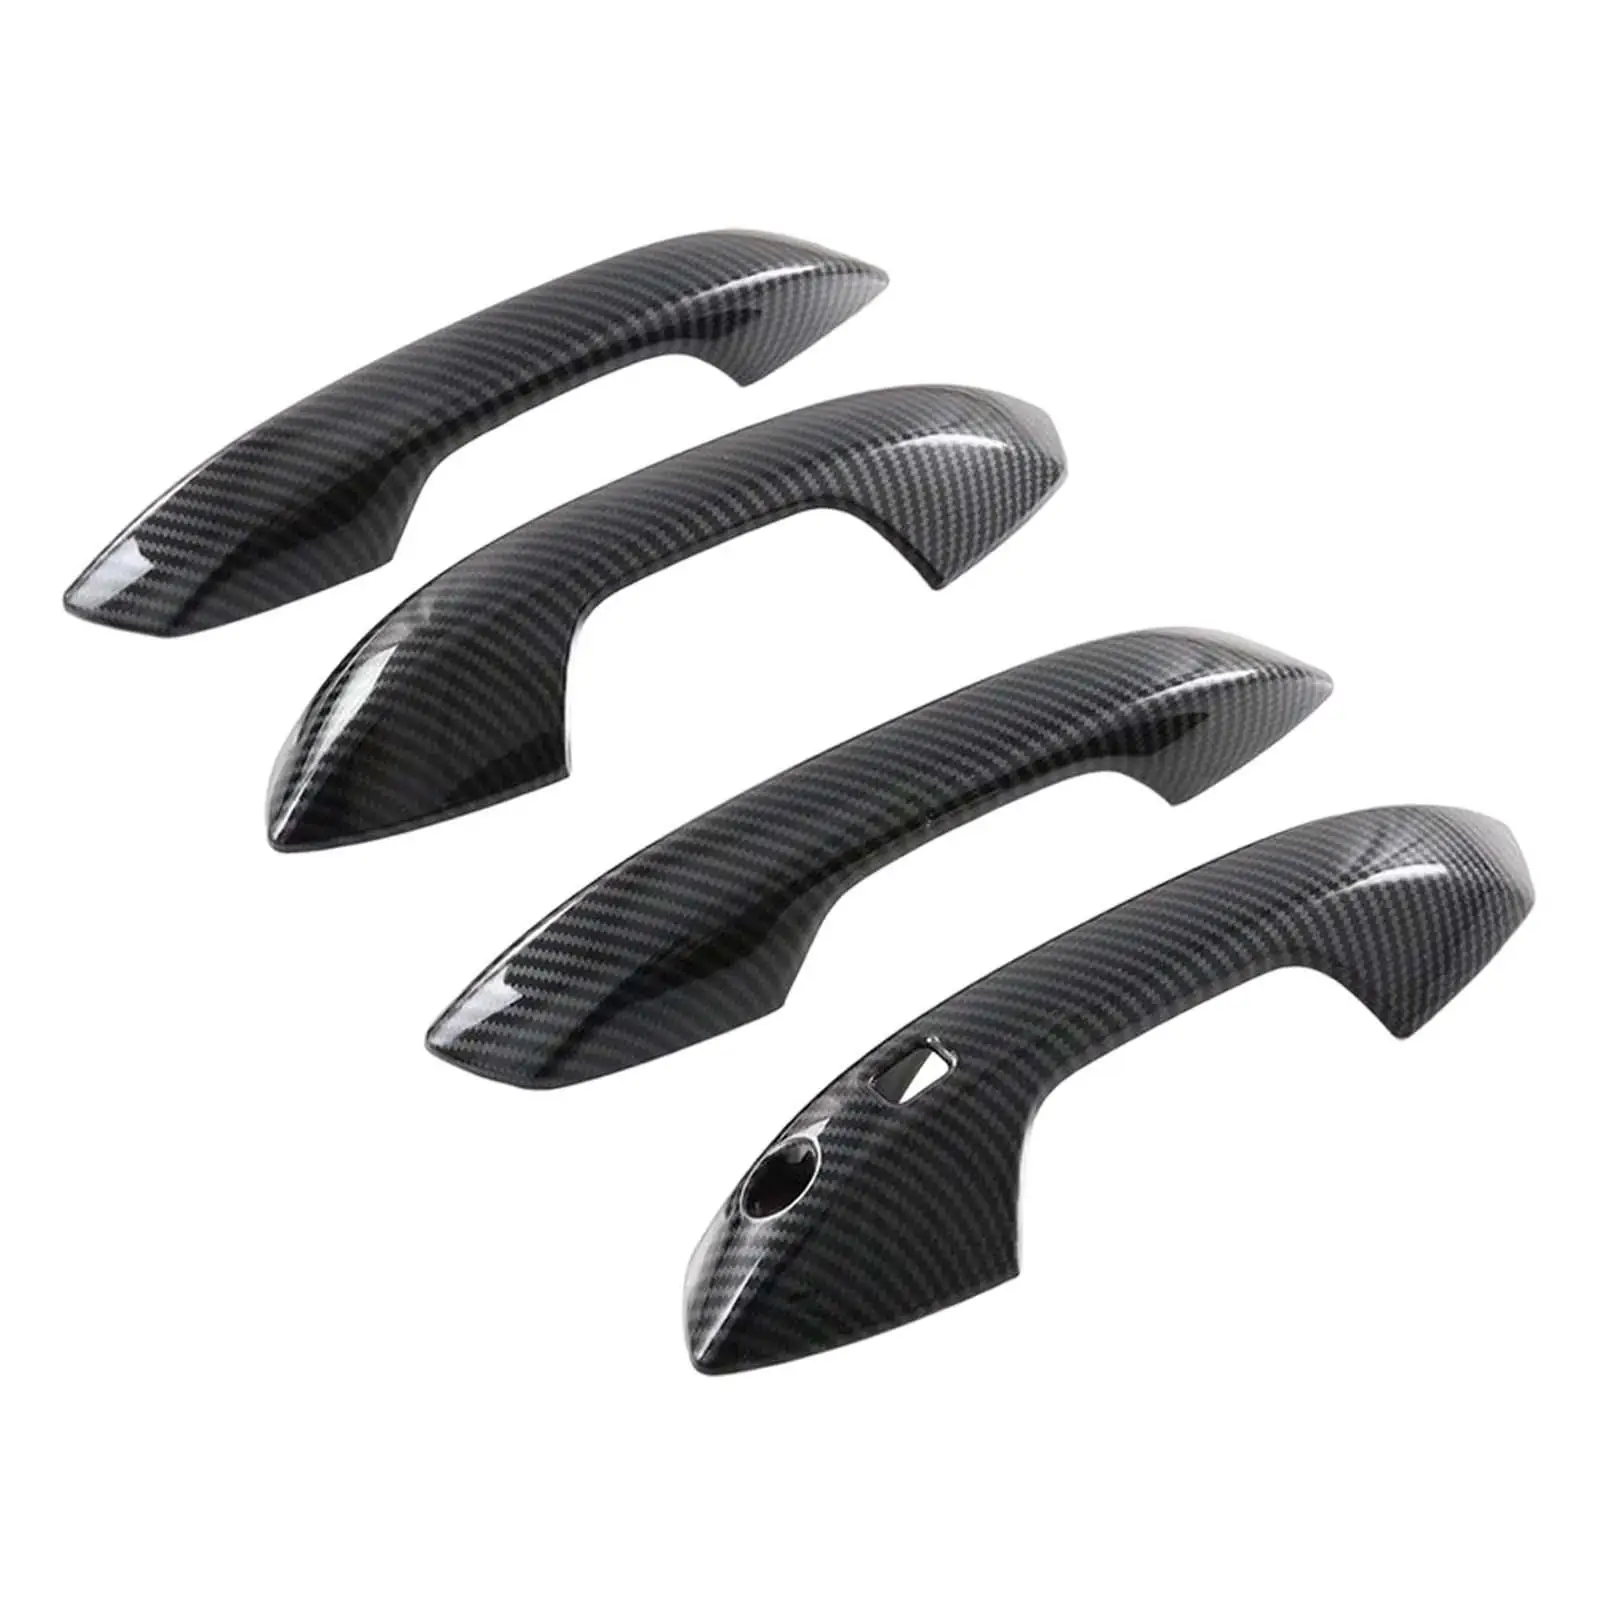 4x Auto Door Handle Protective Cover Scratch Guard Trim Door Knob Parts Replacement Decorative Protector for Byd Atto 3